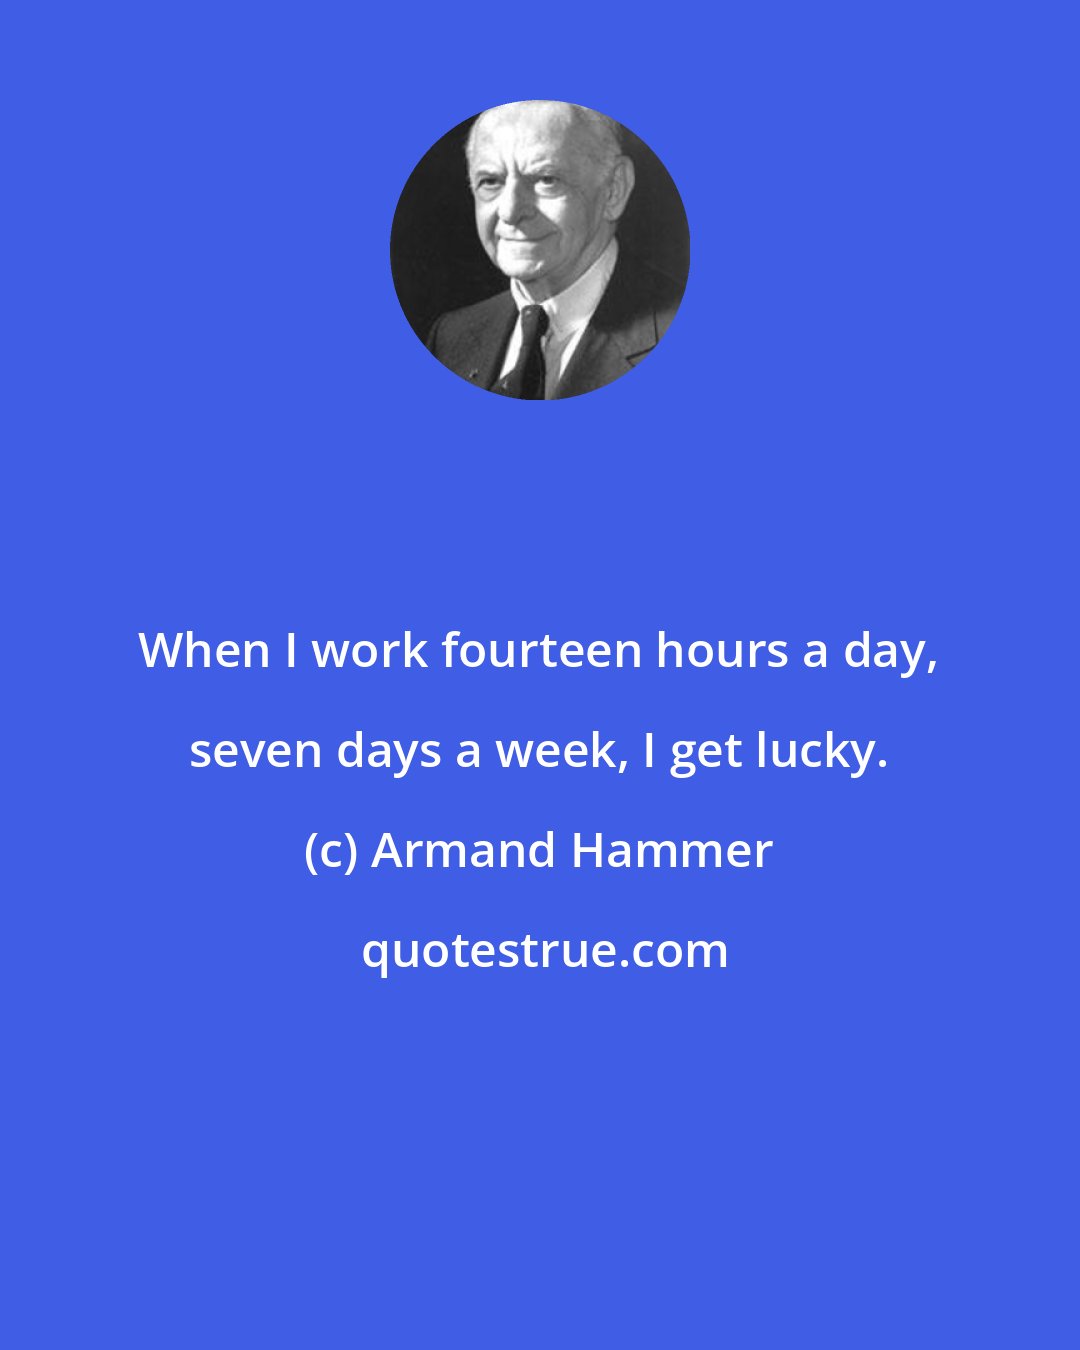 Armand Hammer: When I work fourteen hours a day, seven days a week, I get lucky.